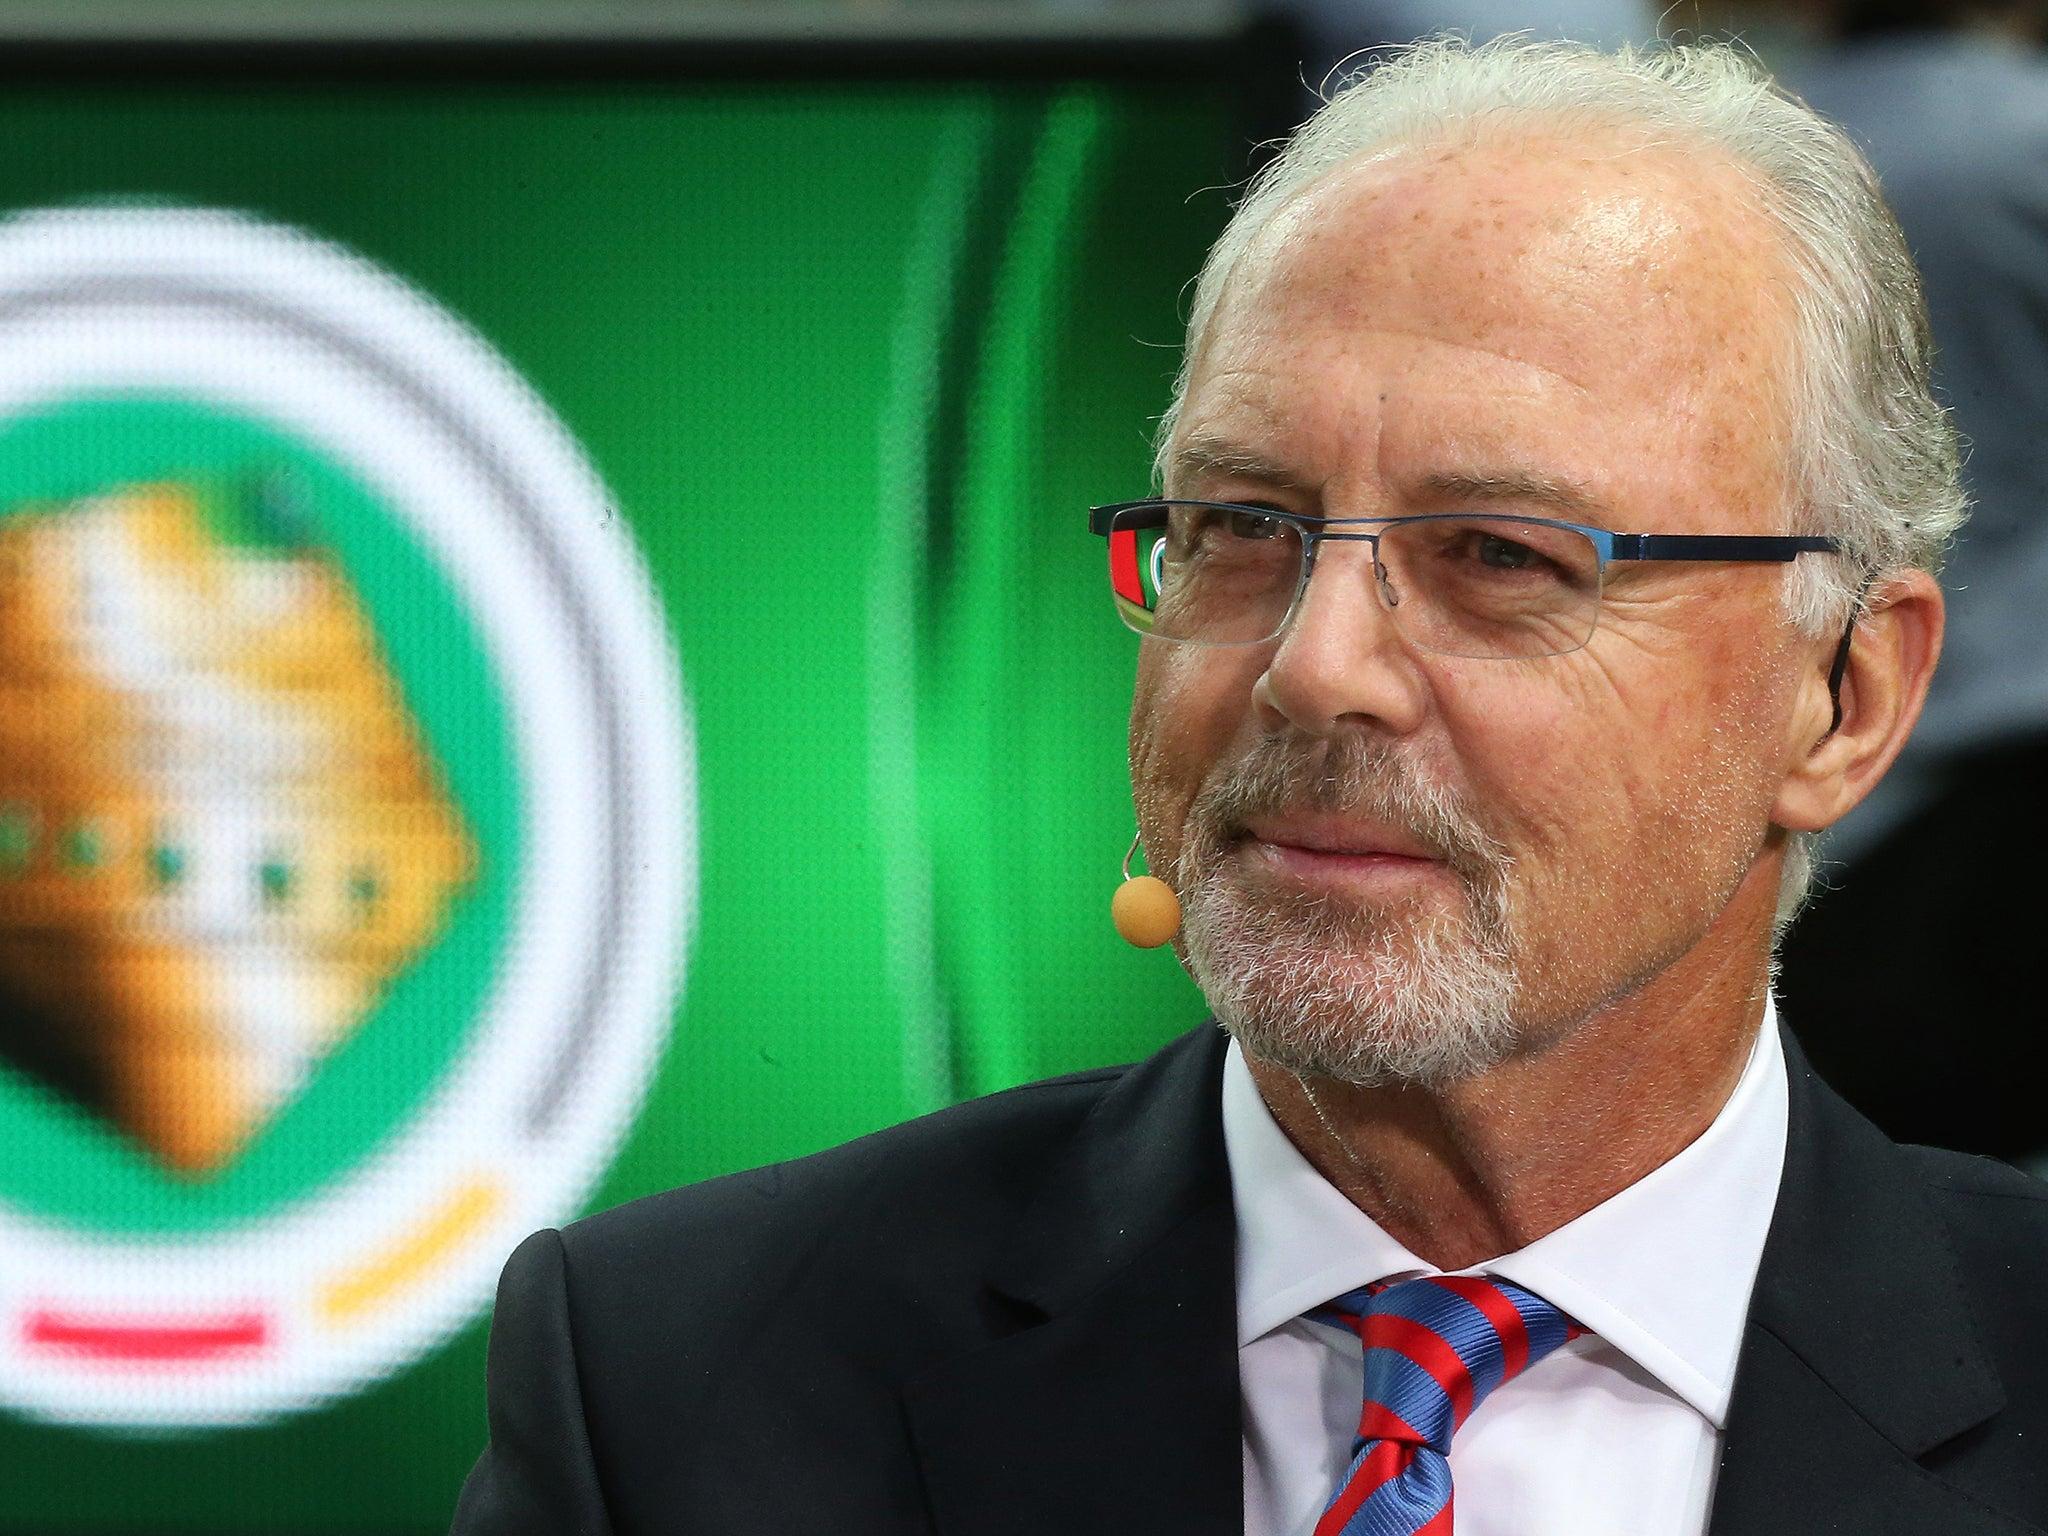 Franz Beckenbauer banned from football for 90 days